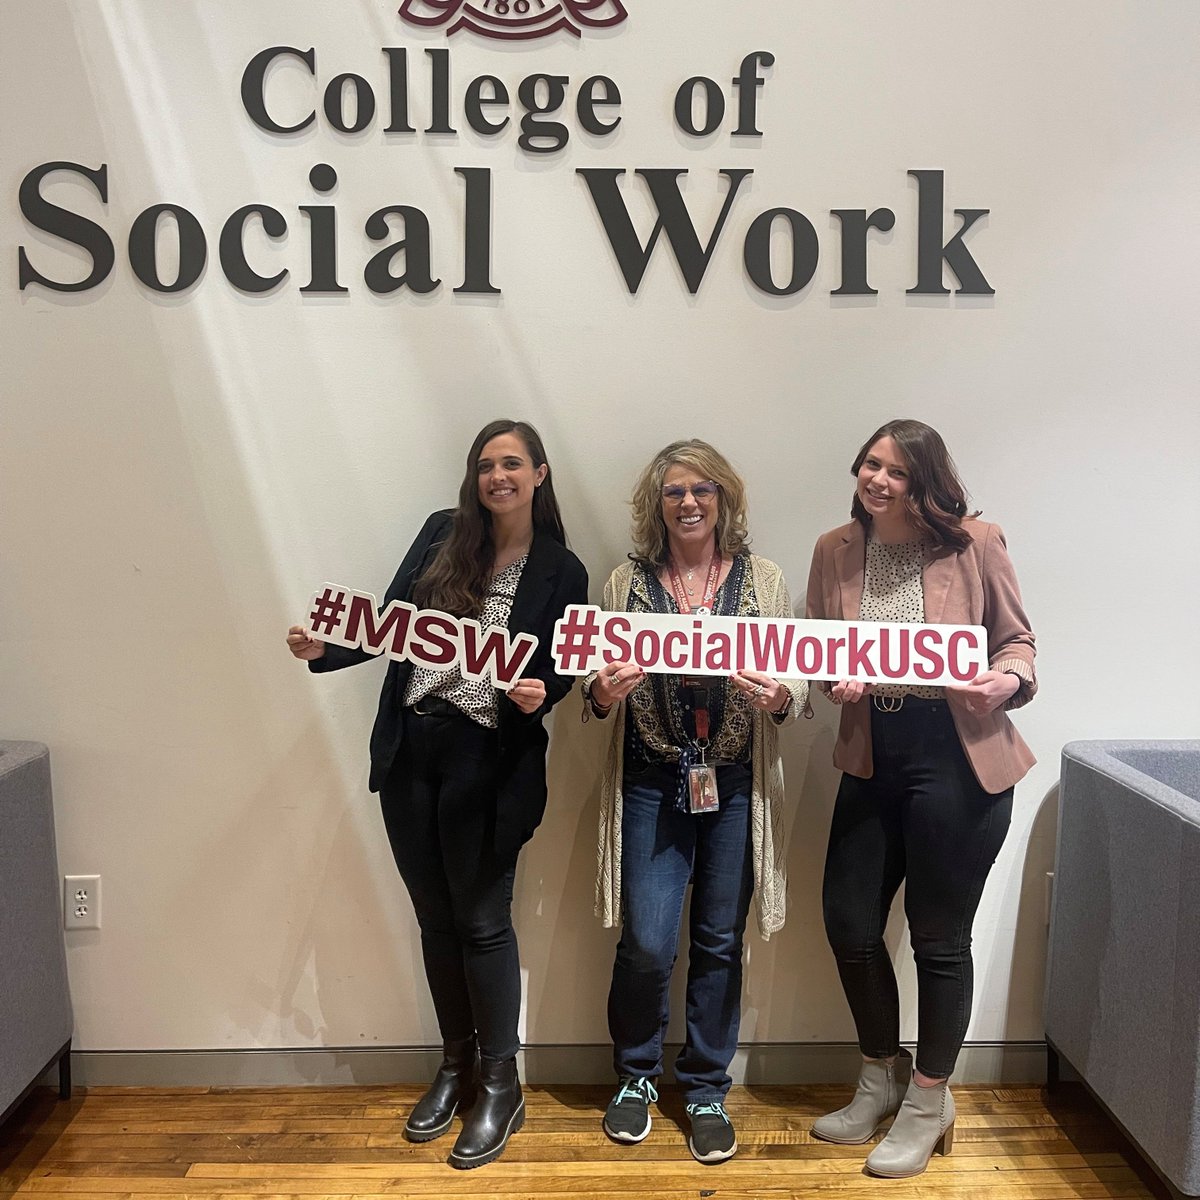 Congrats to our students Erin Flaxman and Sophie Sumter, with professor Rhonda DiNovo! They were selected to present at @NASWSC's mini symposium on #socialwork and law enforcement. 🥳 @westcolumbiapd #ChangeMakerGamecocks